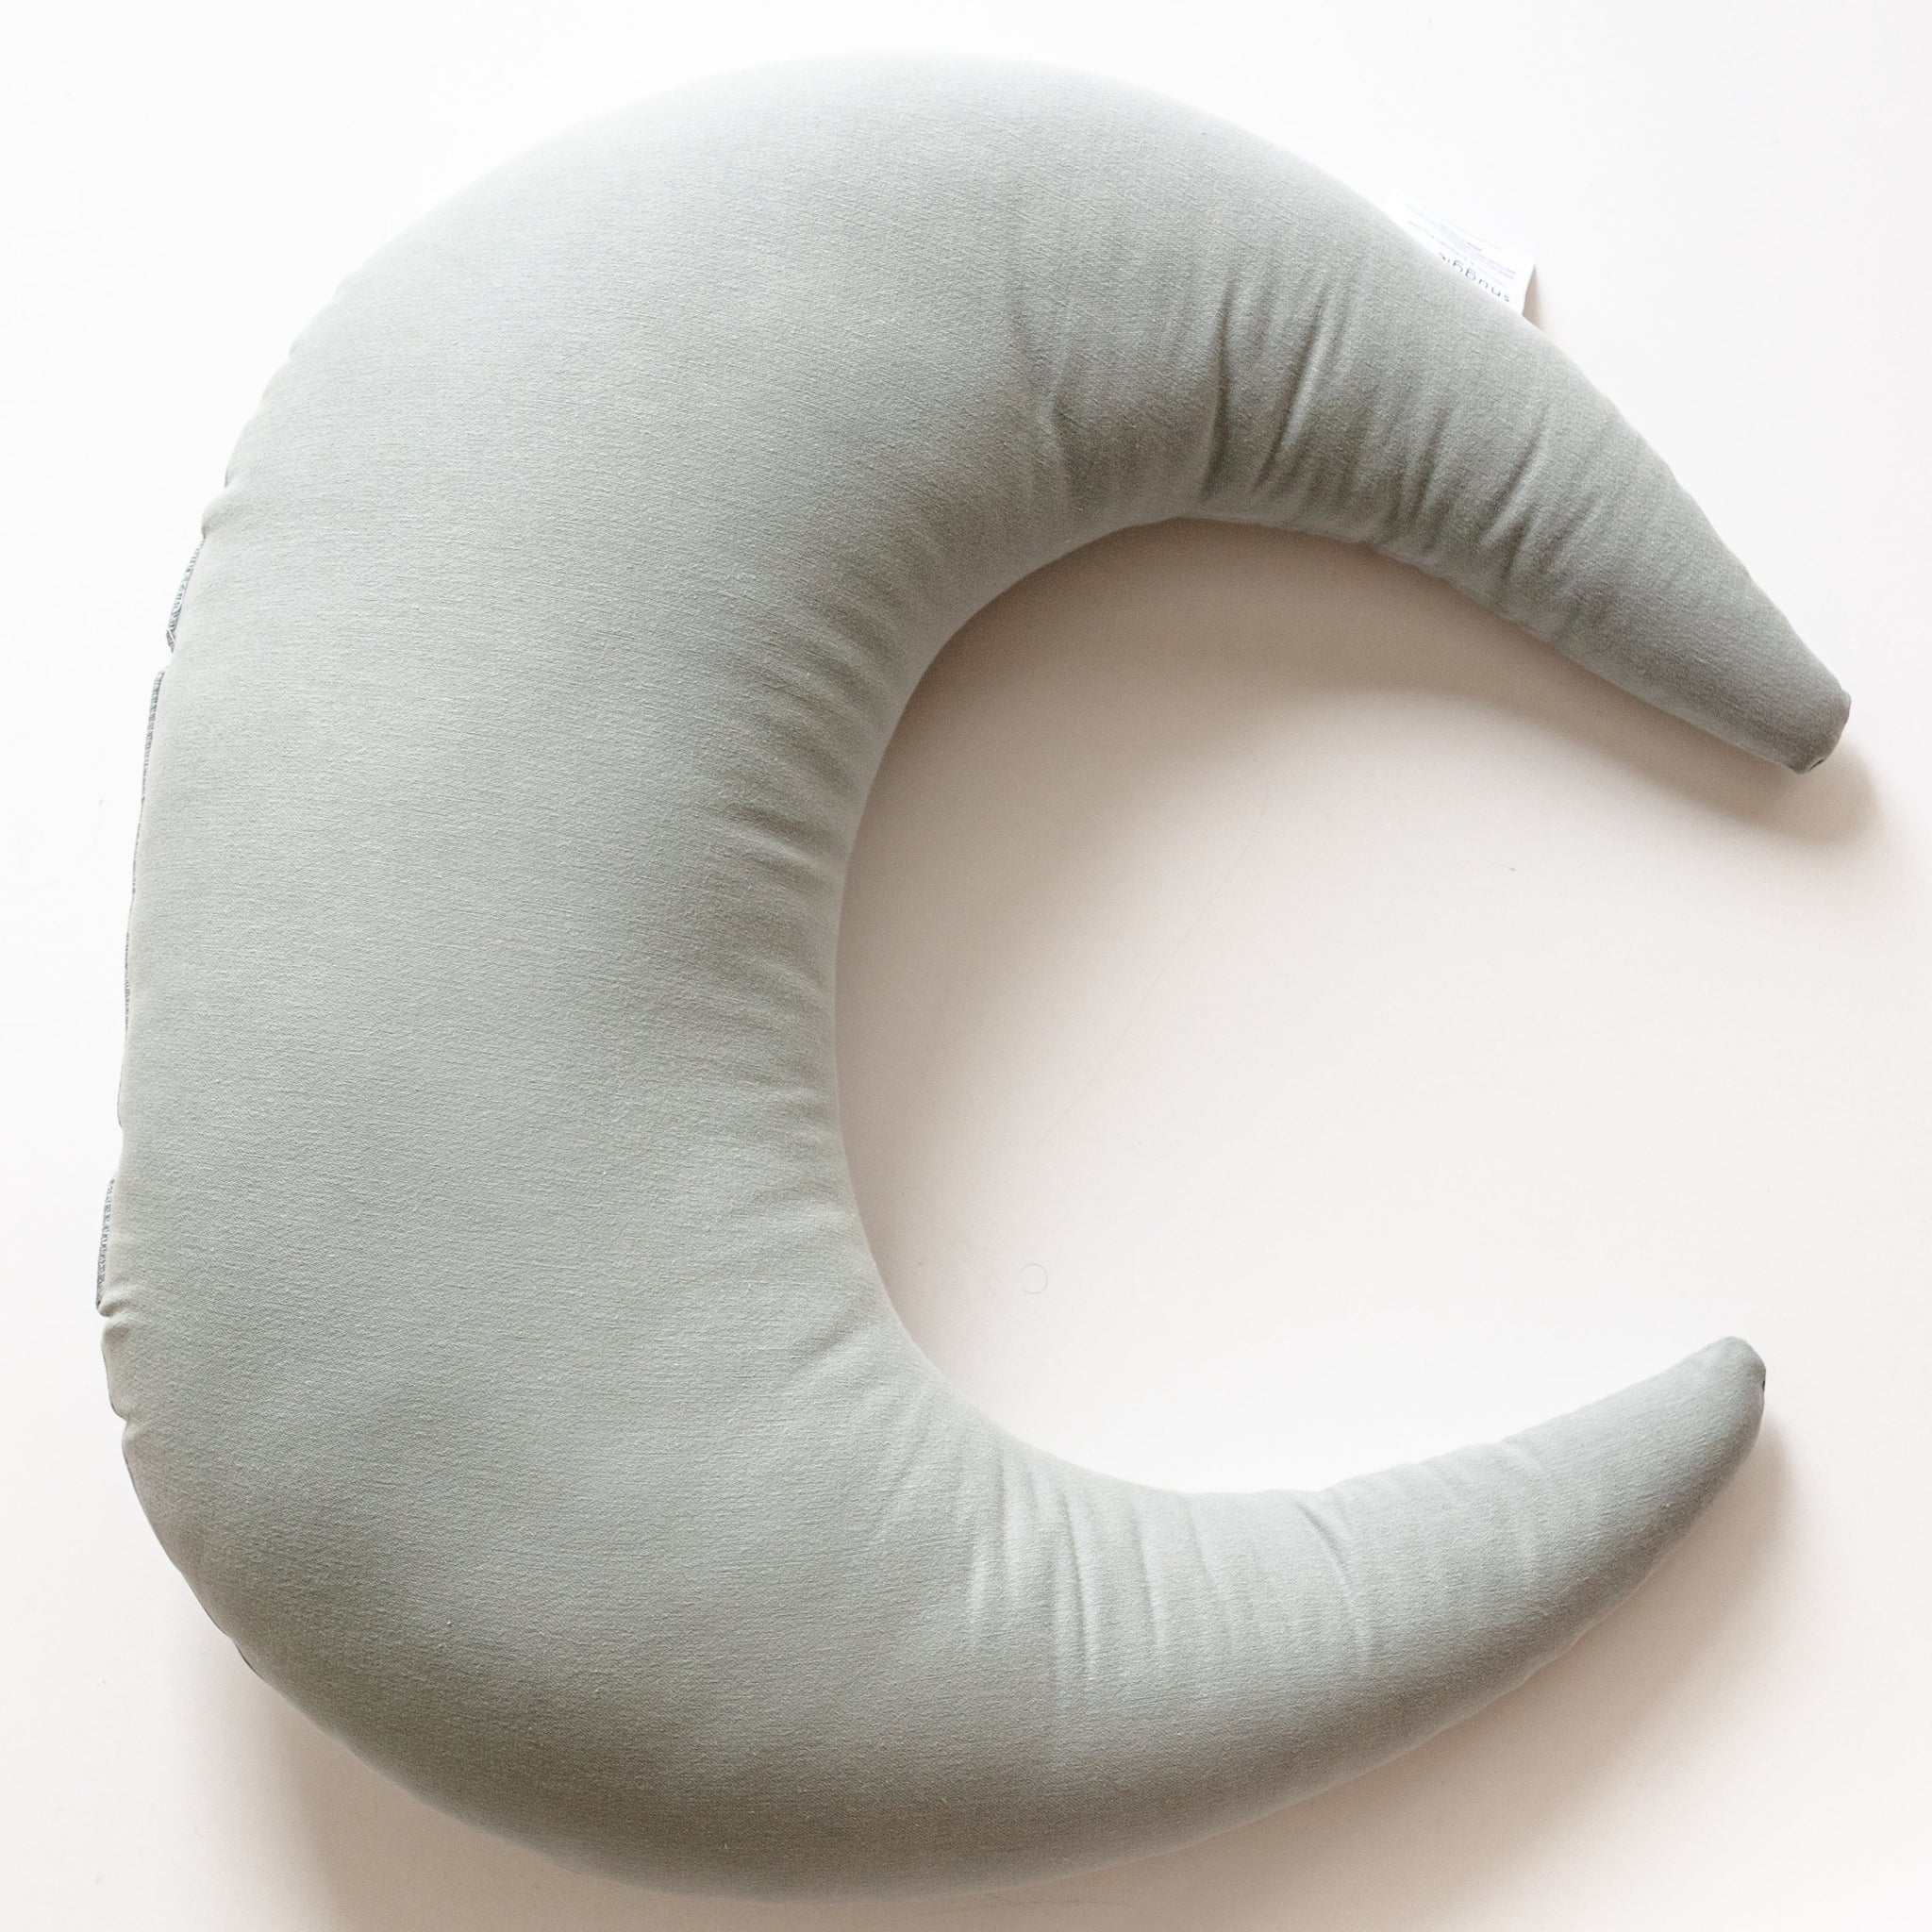 A Snuggle Me Feeding & Support Pillow in a crescent shape in the shade Slate on a white surface.